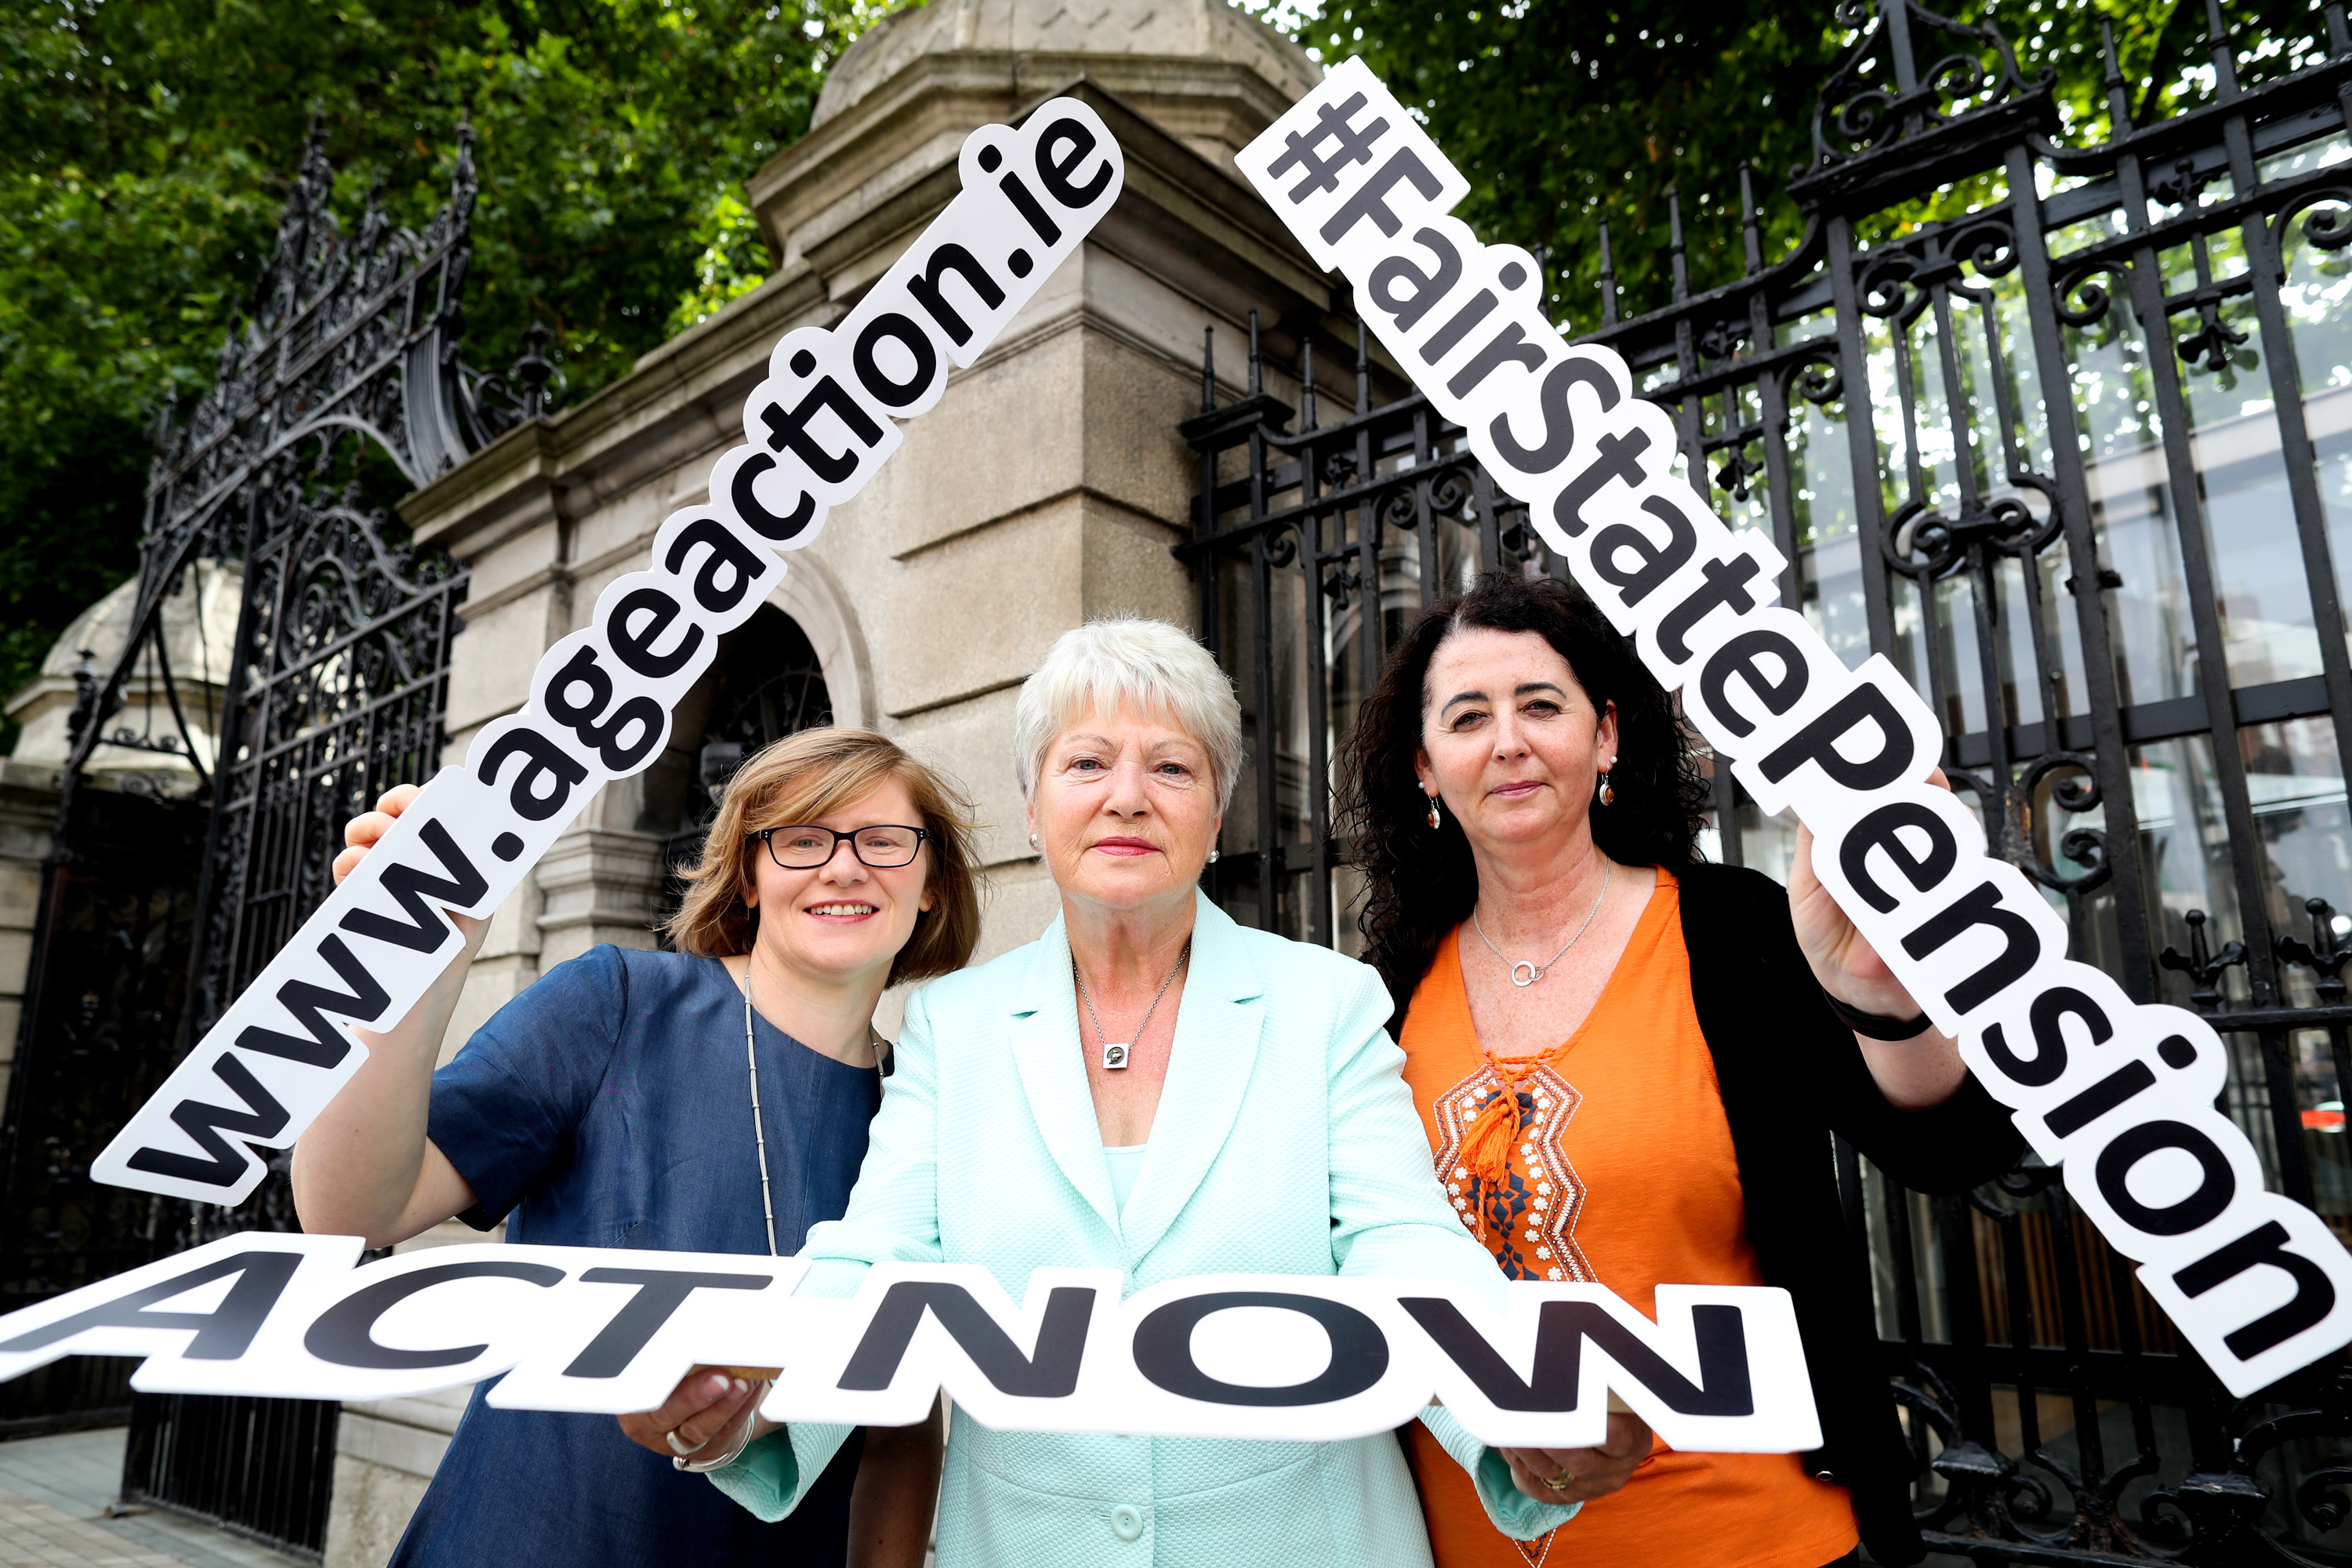 Orla O'Connor of the National Women's Council of Ireland, Marie O'Toole of the Irish Countrywomen's Association and Lorraine Fitzsimons of Age Action supporting the campaign for a fair State Pension.